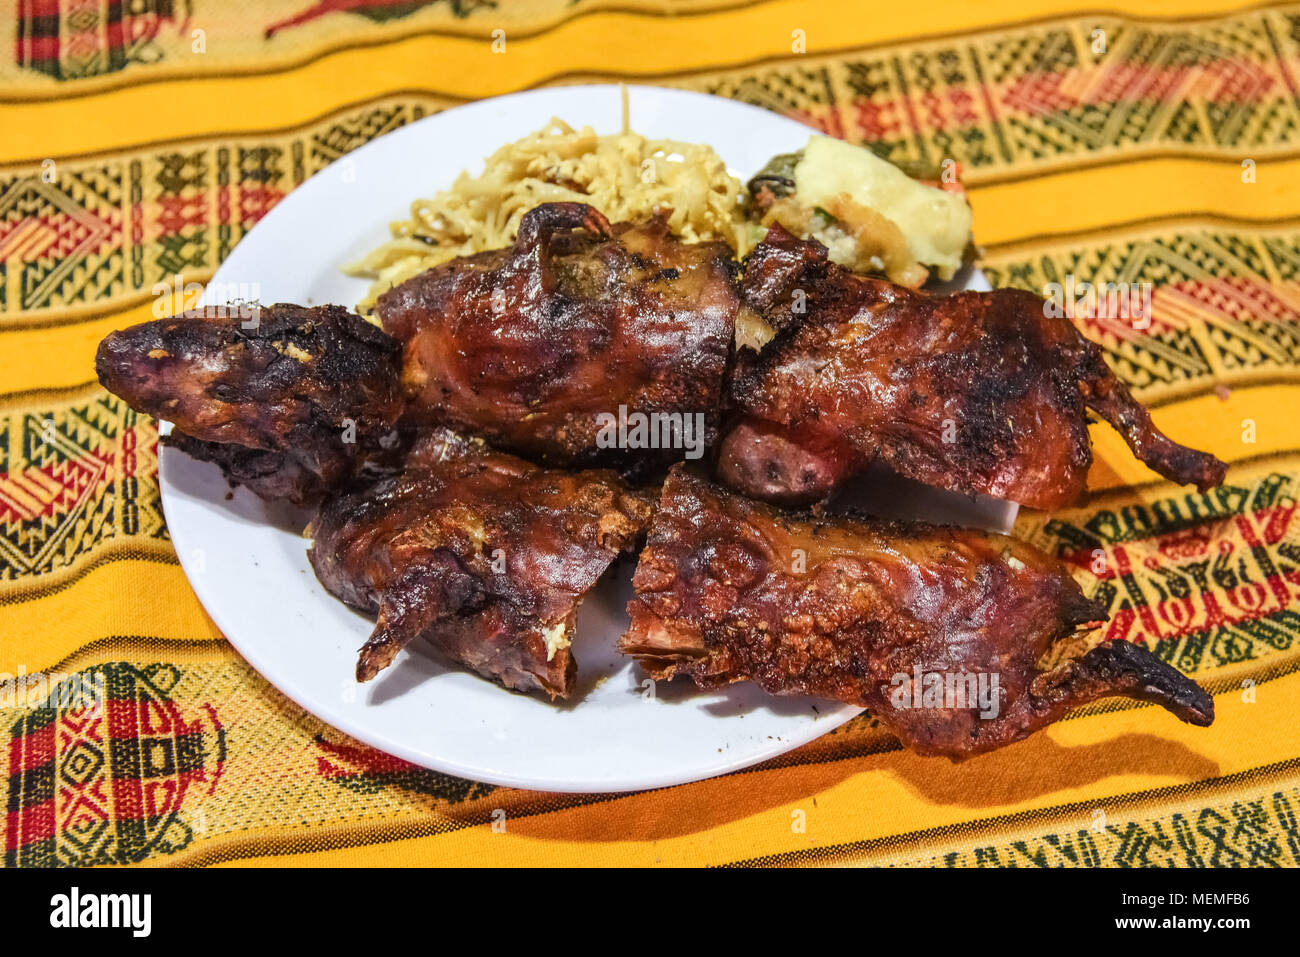 Guinea pig dish. Peruvian delicacy commonly served in restaurants in the mountains. Latin name of the dish is cuy chactado. Stock Photo